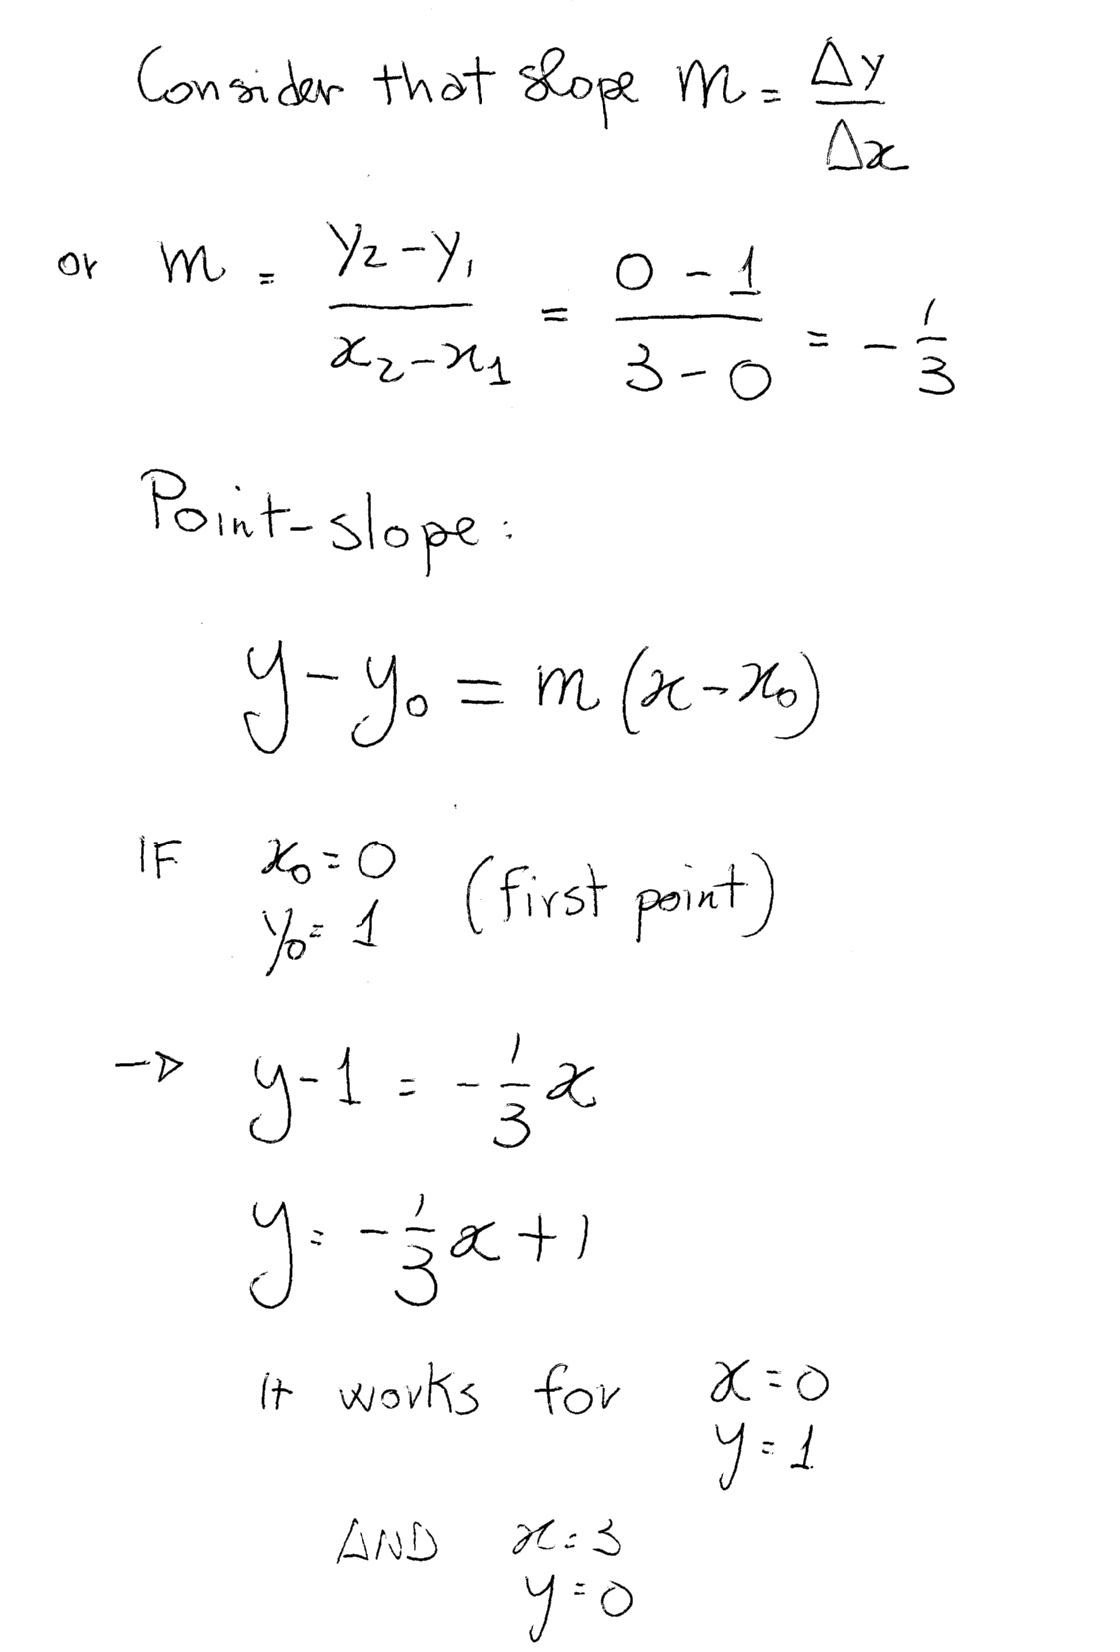 How do you write in point-slope form the equation of the line